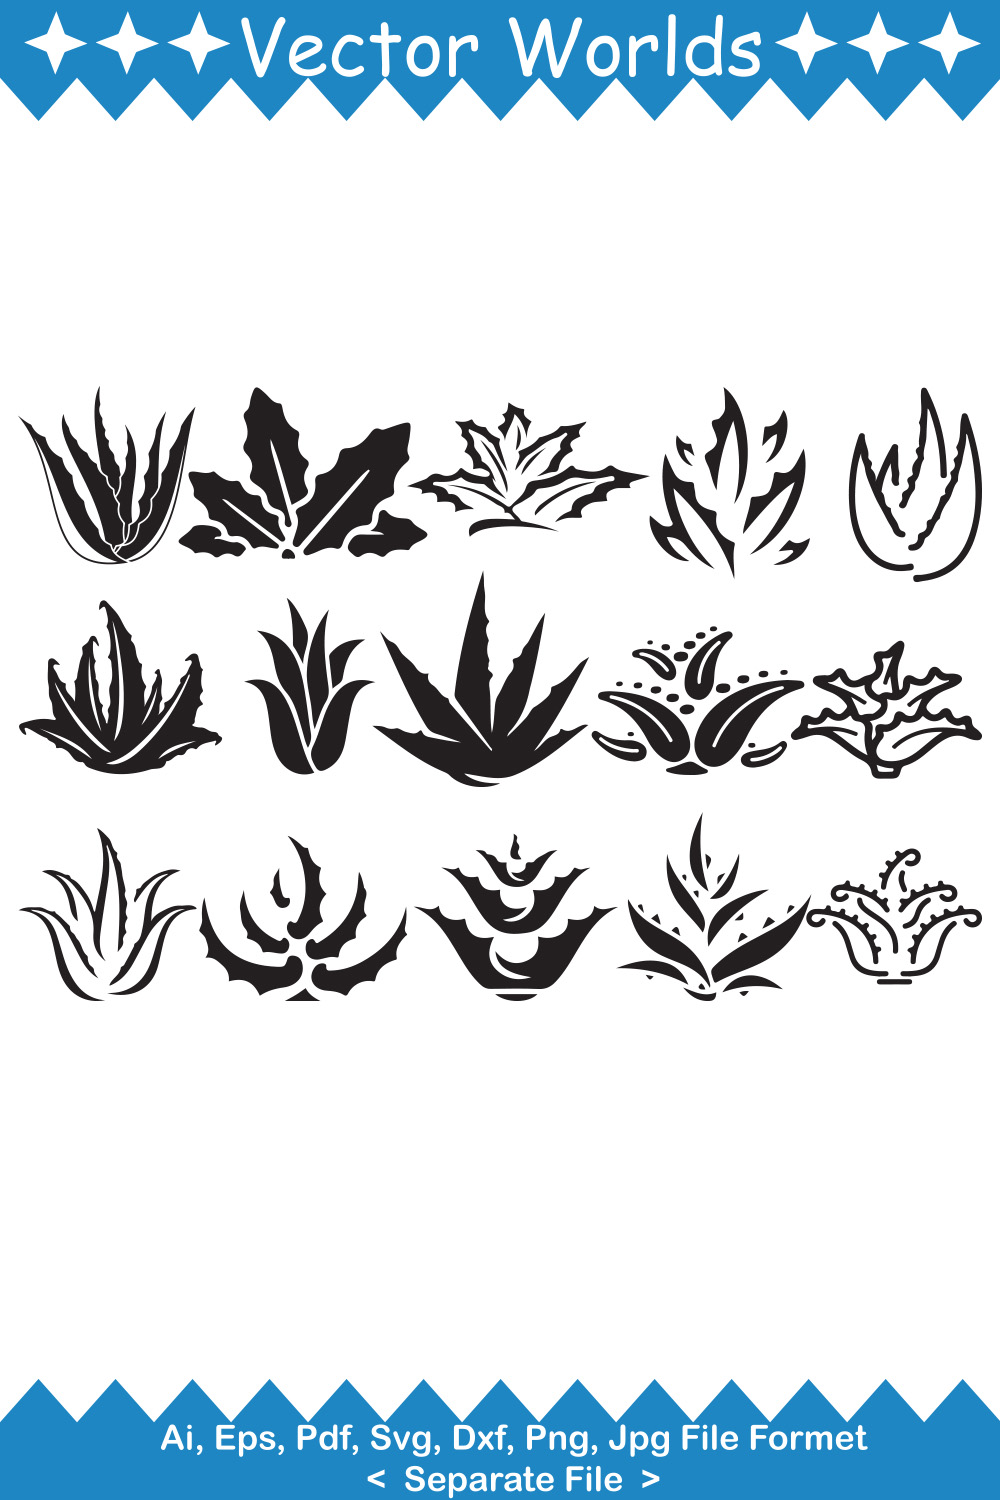 Collection of charming aloe vera vector images.